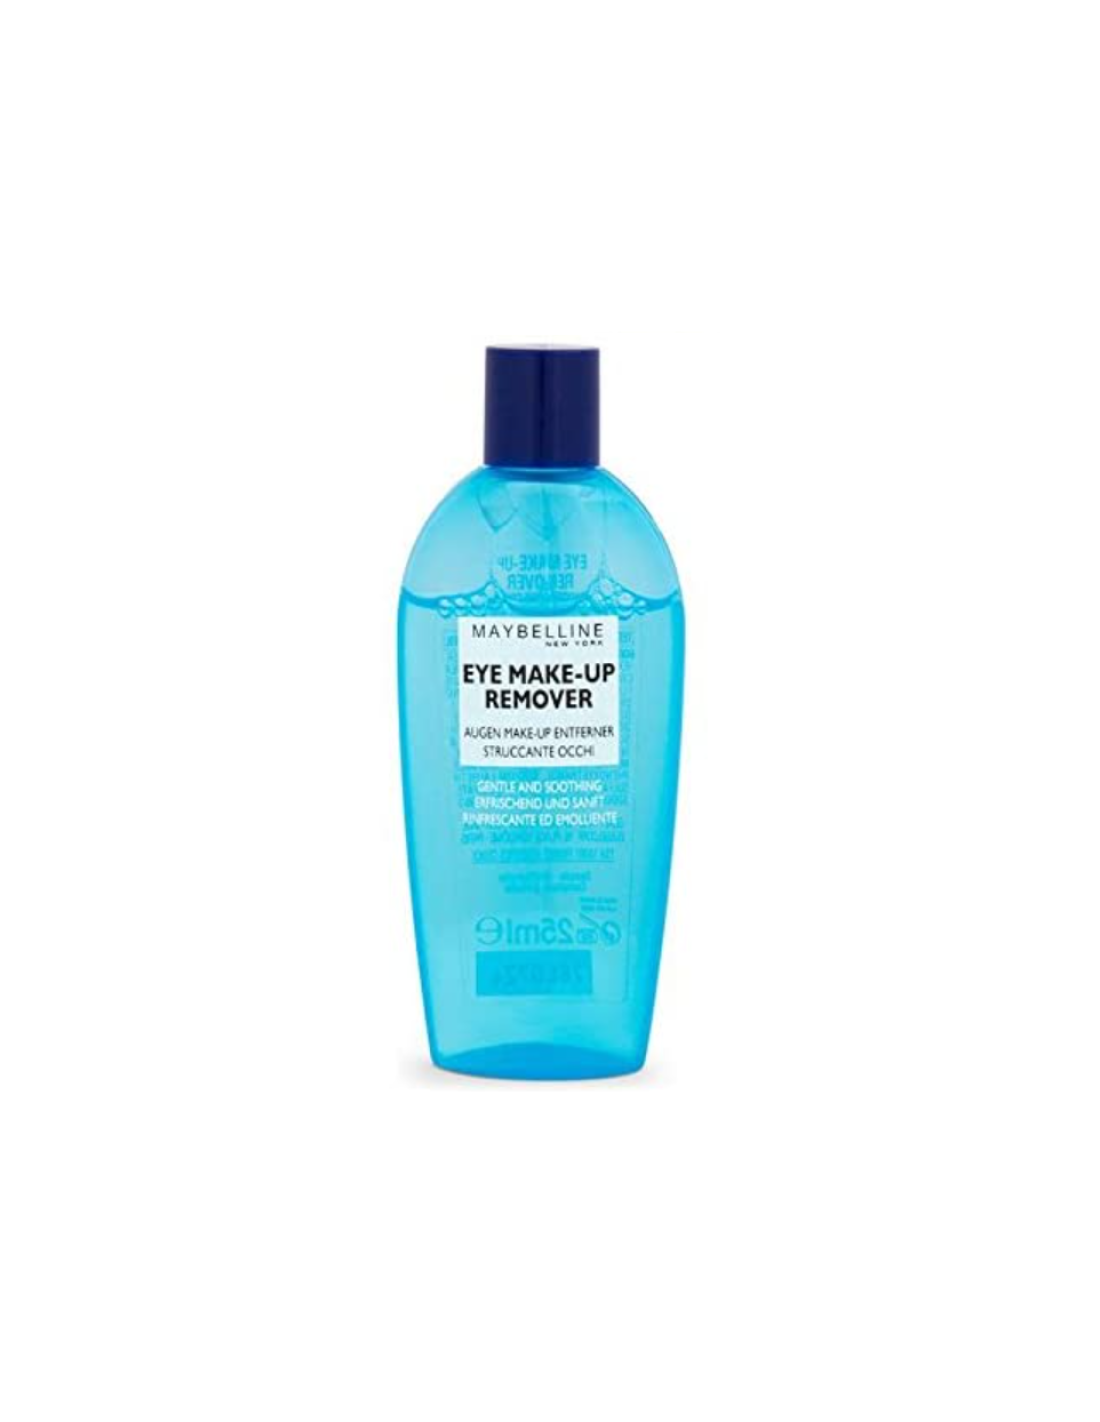 Maybelline gentle and remover 25ml eye make-up soothing